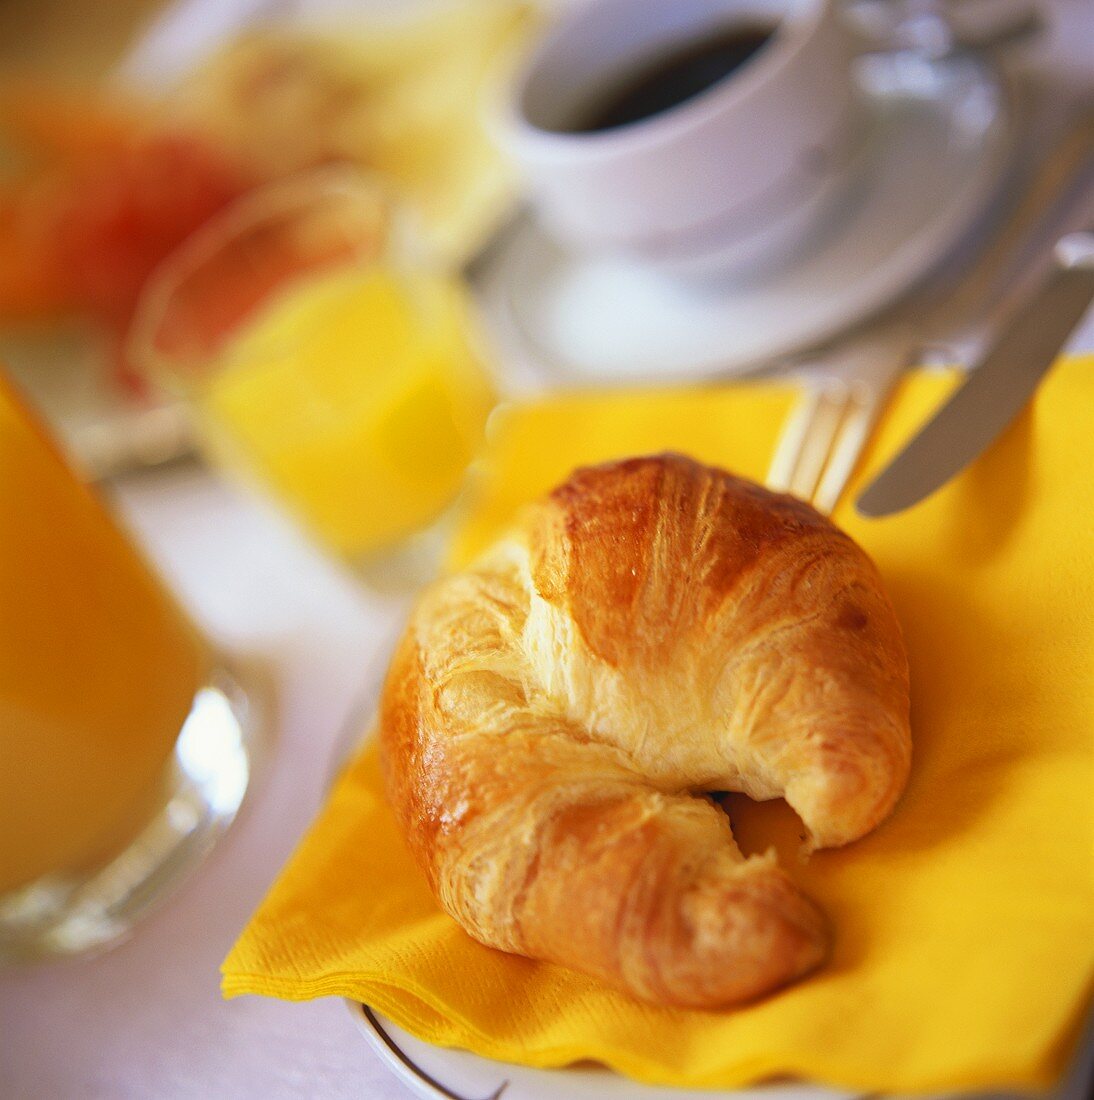 Croissant, coffee and orange juice for breakfast